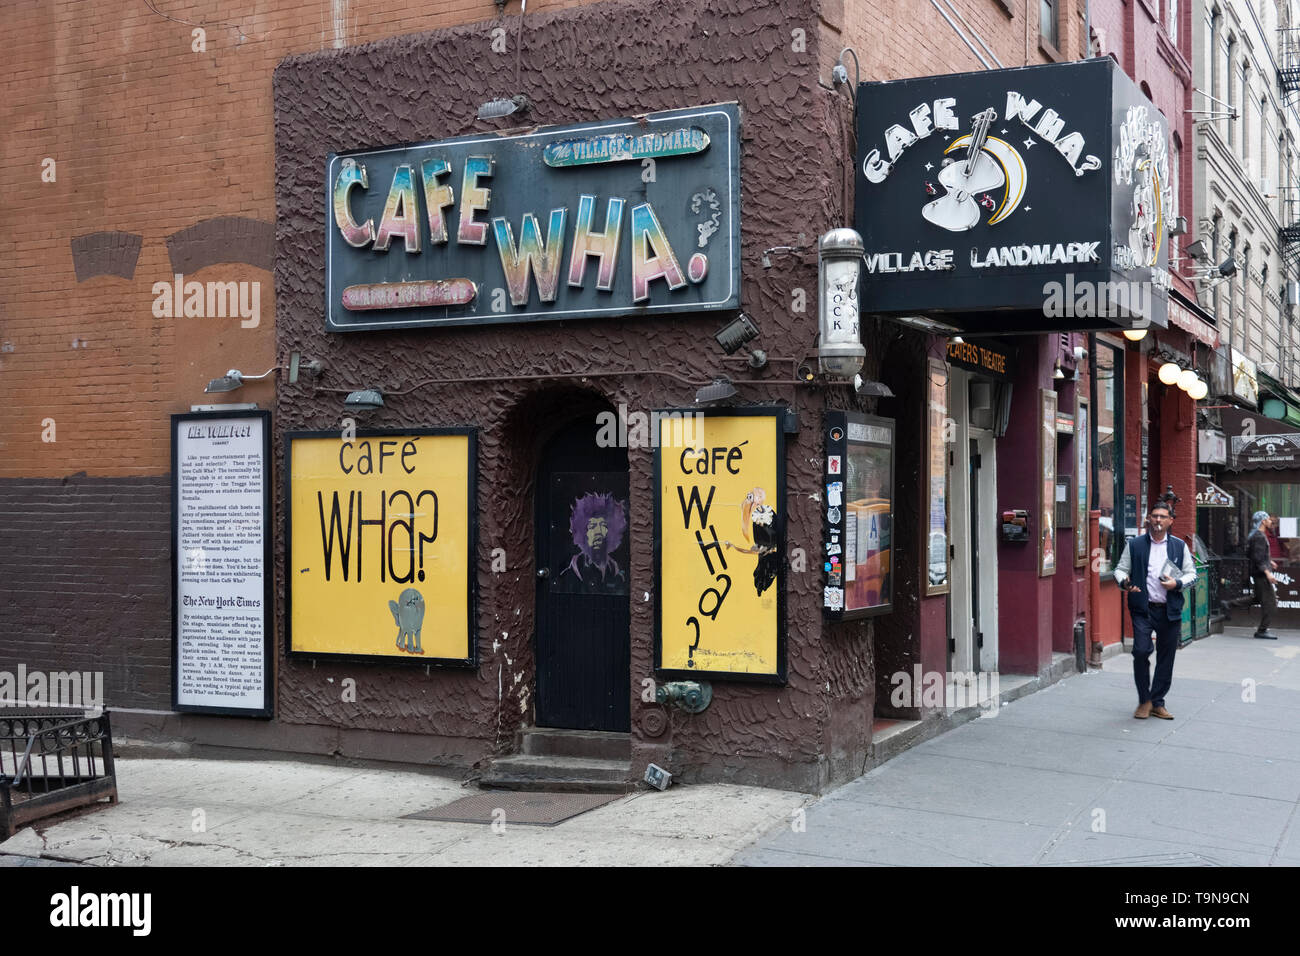 Cafe Wha, historic live music venue in Greenwich Village, downtown Manhattan, New York City, USA Stock Photo